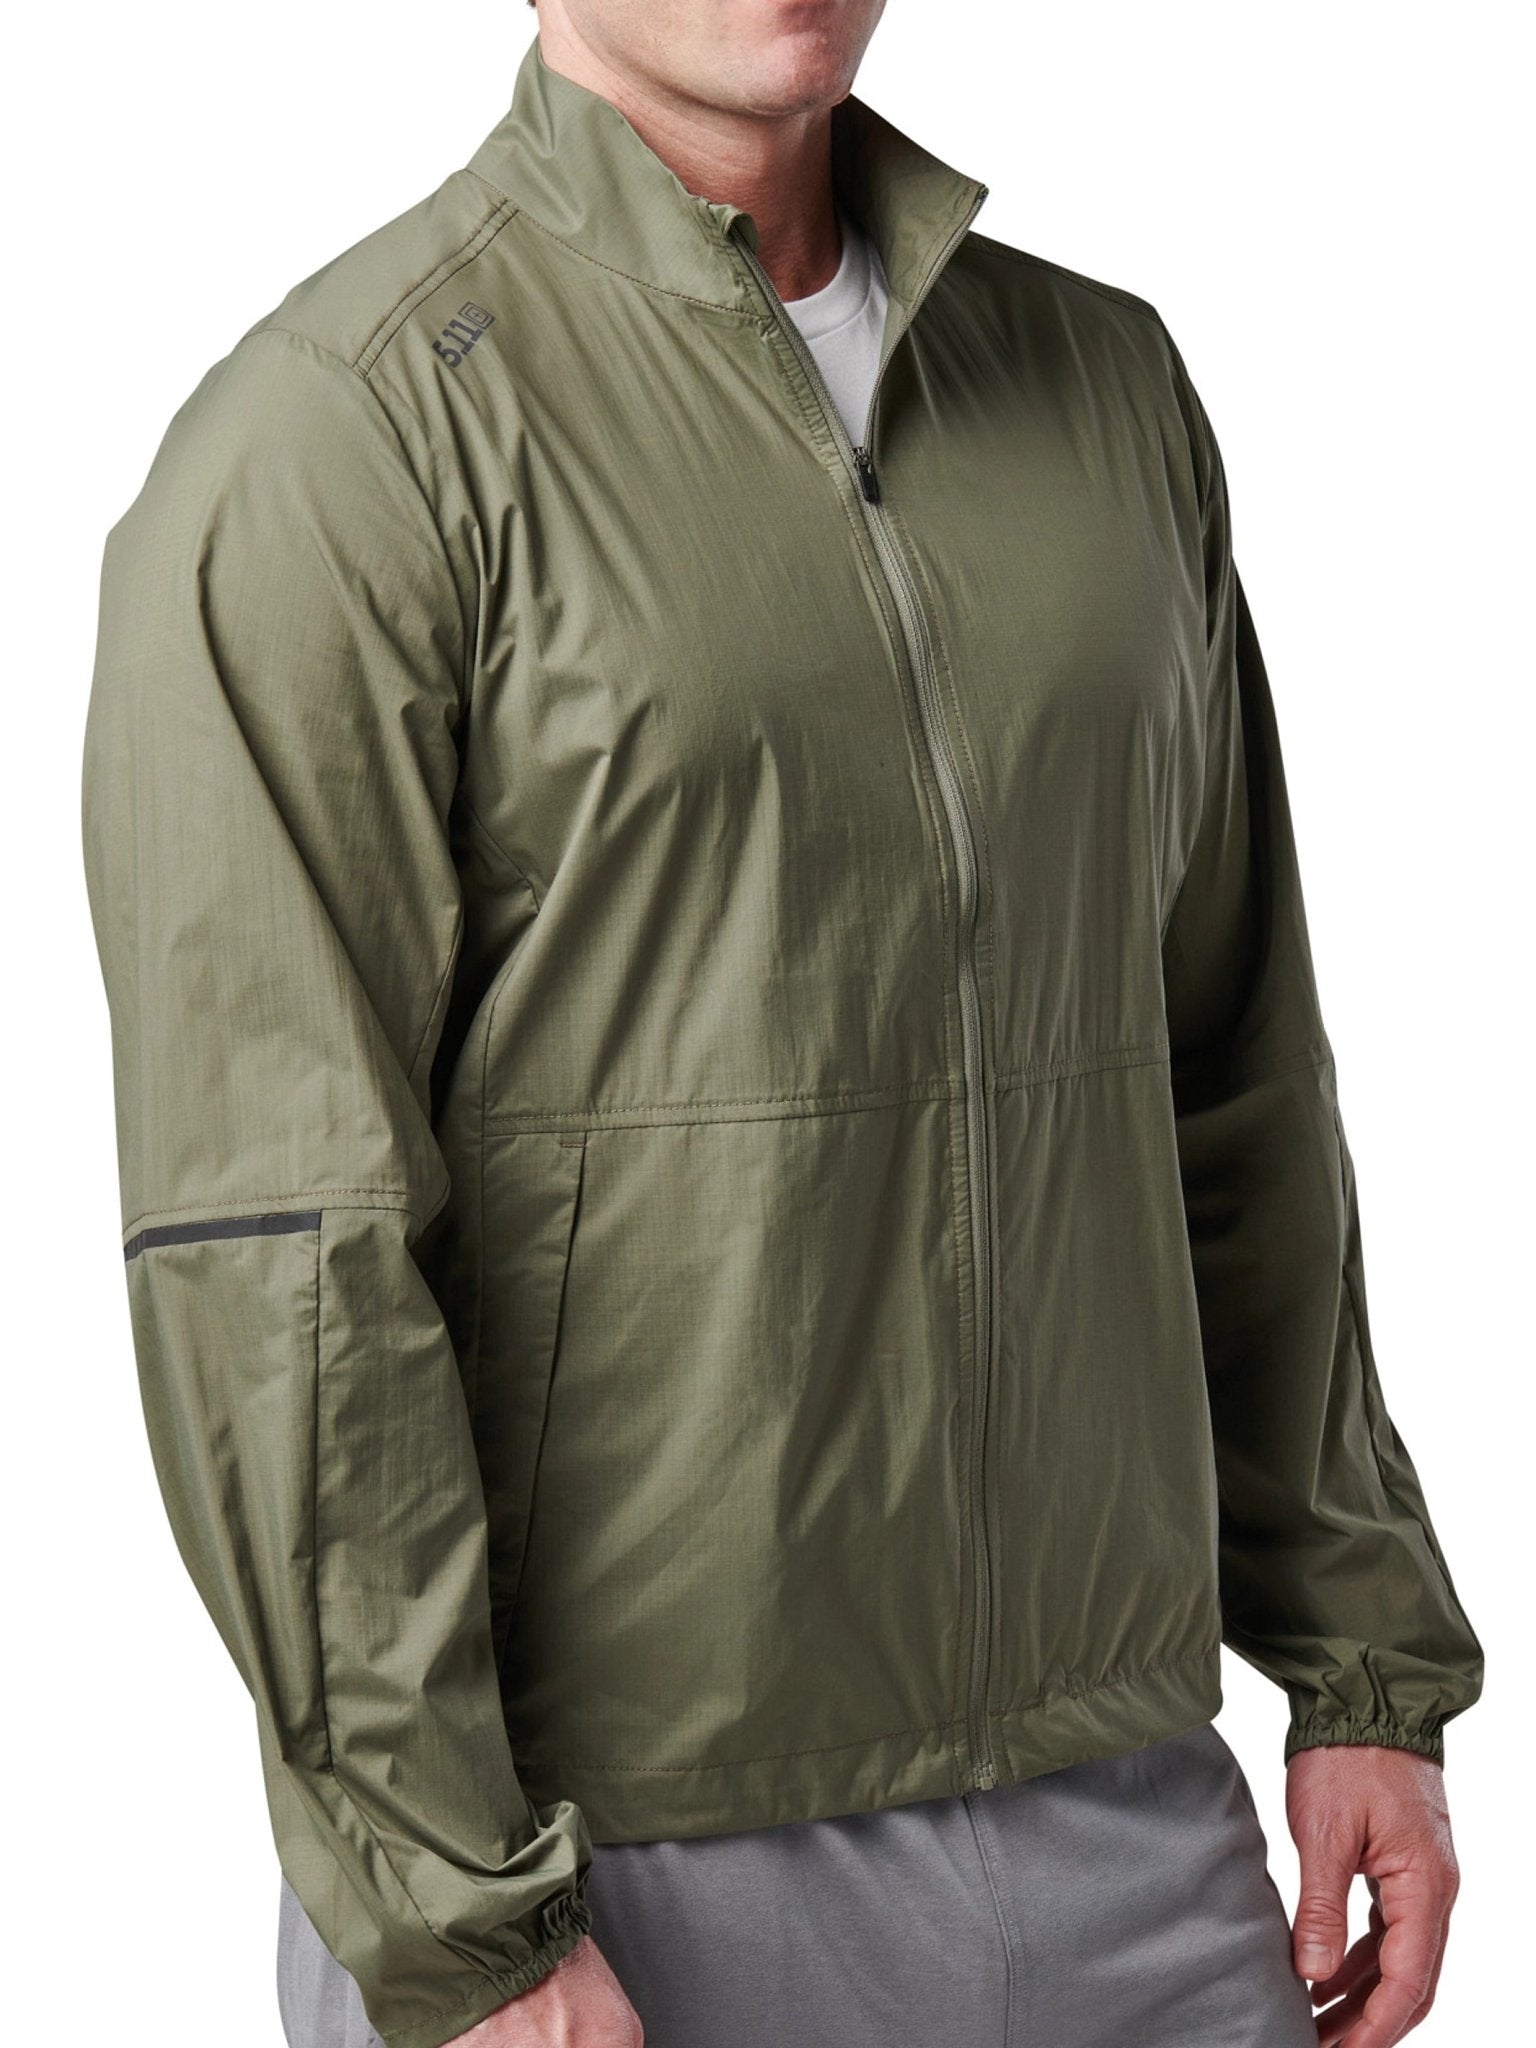 4elementsclothing5.11 Tactical5.11 Tactical - PT-R PACKABLE JACKET - Nylon Mini Ripstop - Style 82140Coats & Jackets82140-963-S